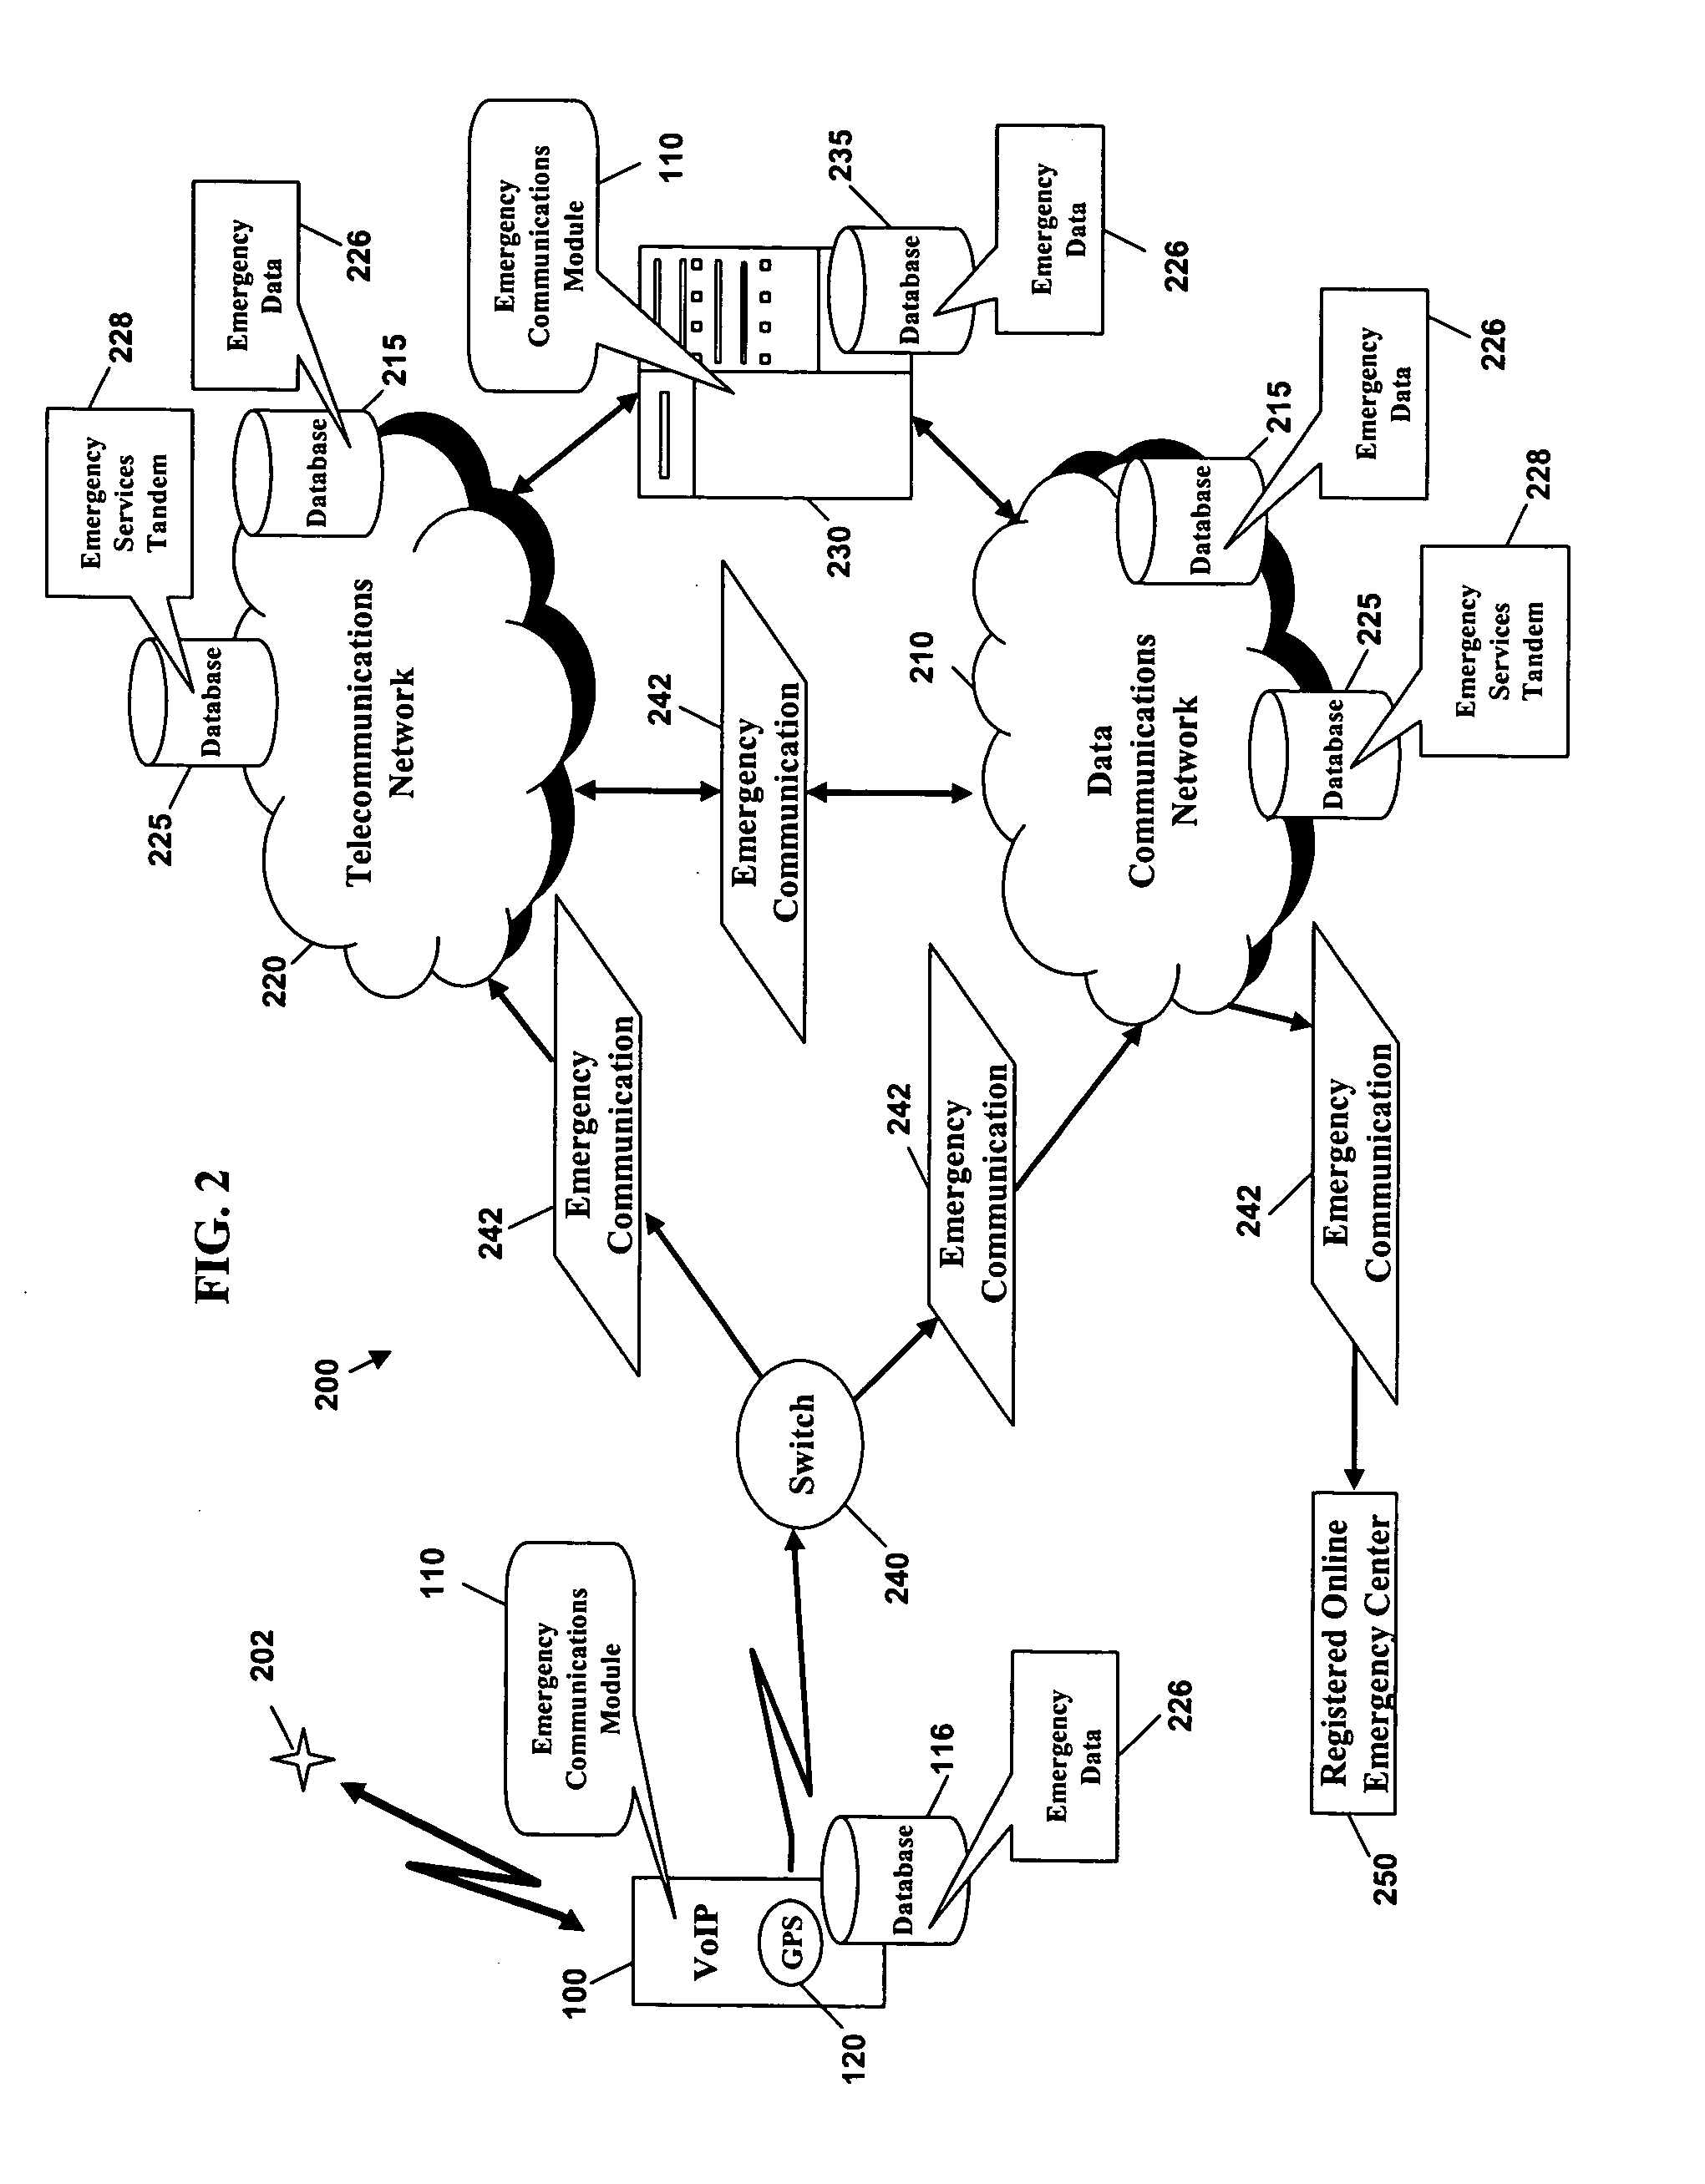 Method and system for routing emergency data communications